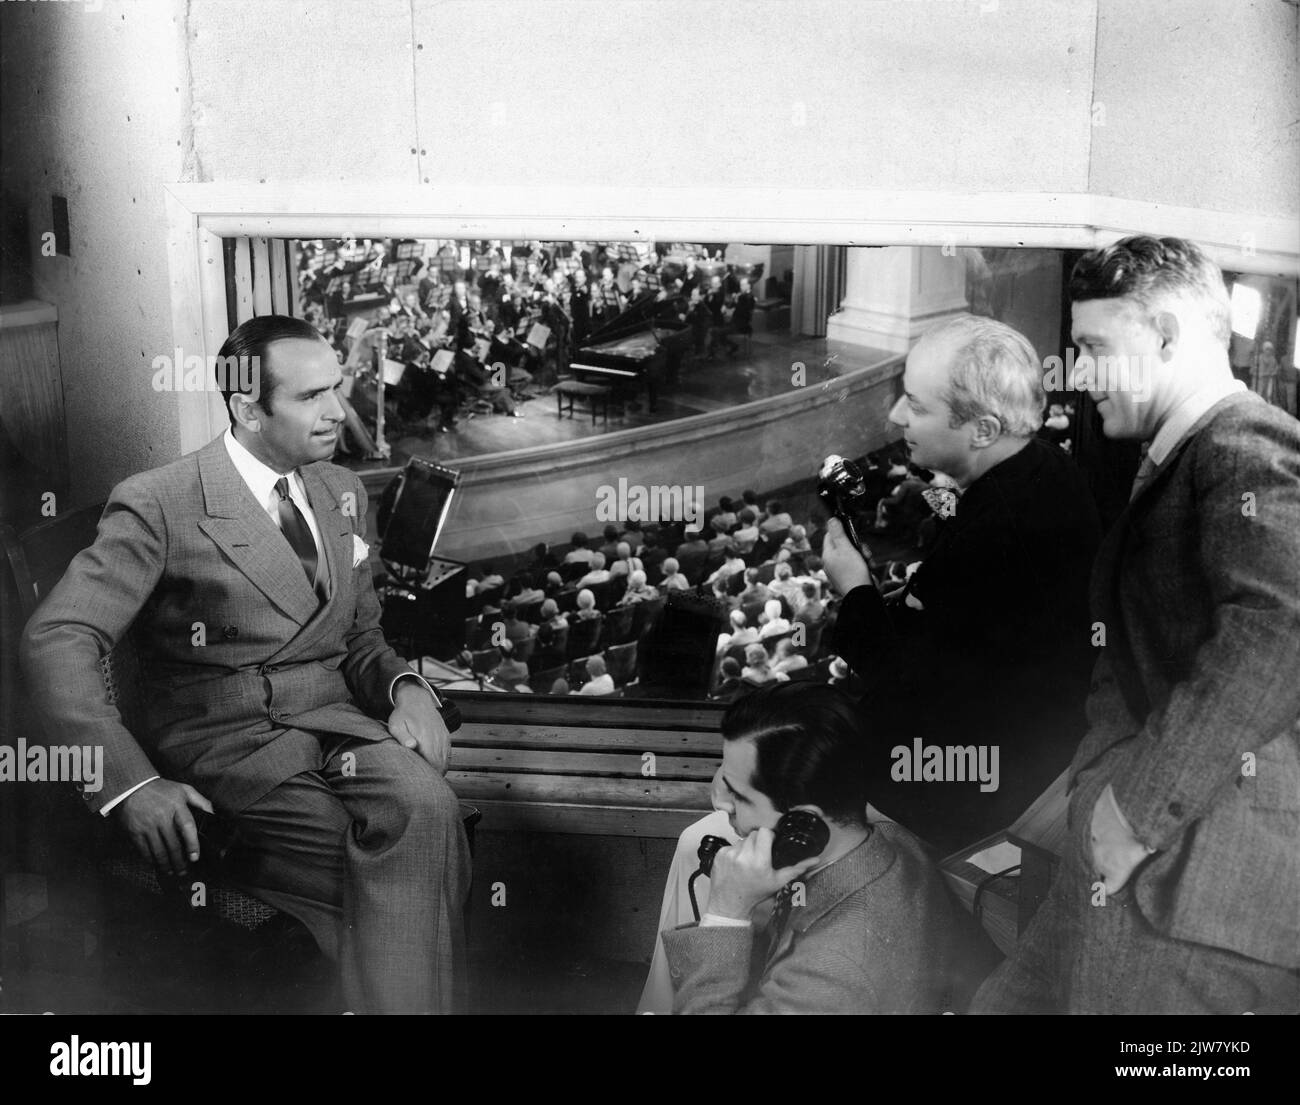 DOUGLAS FAIRBANKS Sr. visits Director HERBERT BRENON and Sound Recording Engineer CHARLES DAVID FORREST (on telephone) and Chief Recording Engineer HOWARD E. CAMPBELL in the Monitor Room of the world's largest talking motion picture stage at United Artists Studios in Hollywood to watch the filming of a 75 Piece Symphony Orchestra conducted by Dr. HUGO RIESENFELD in a concert scene for LUMMOX 1930 director HERBERT BRENON novel Fannie Hurst A Joseph M. Schenck Production (as Feature Productions) / United Artists Stock Photo